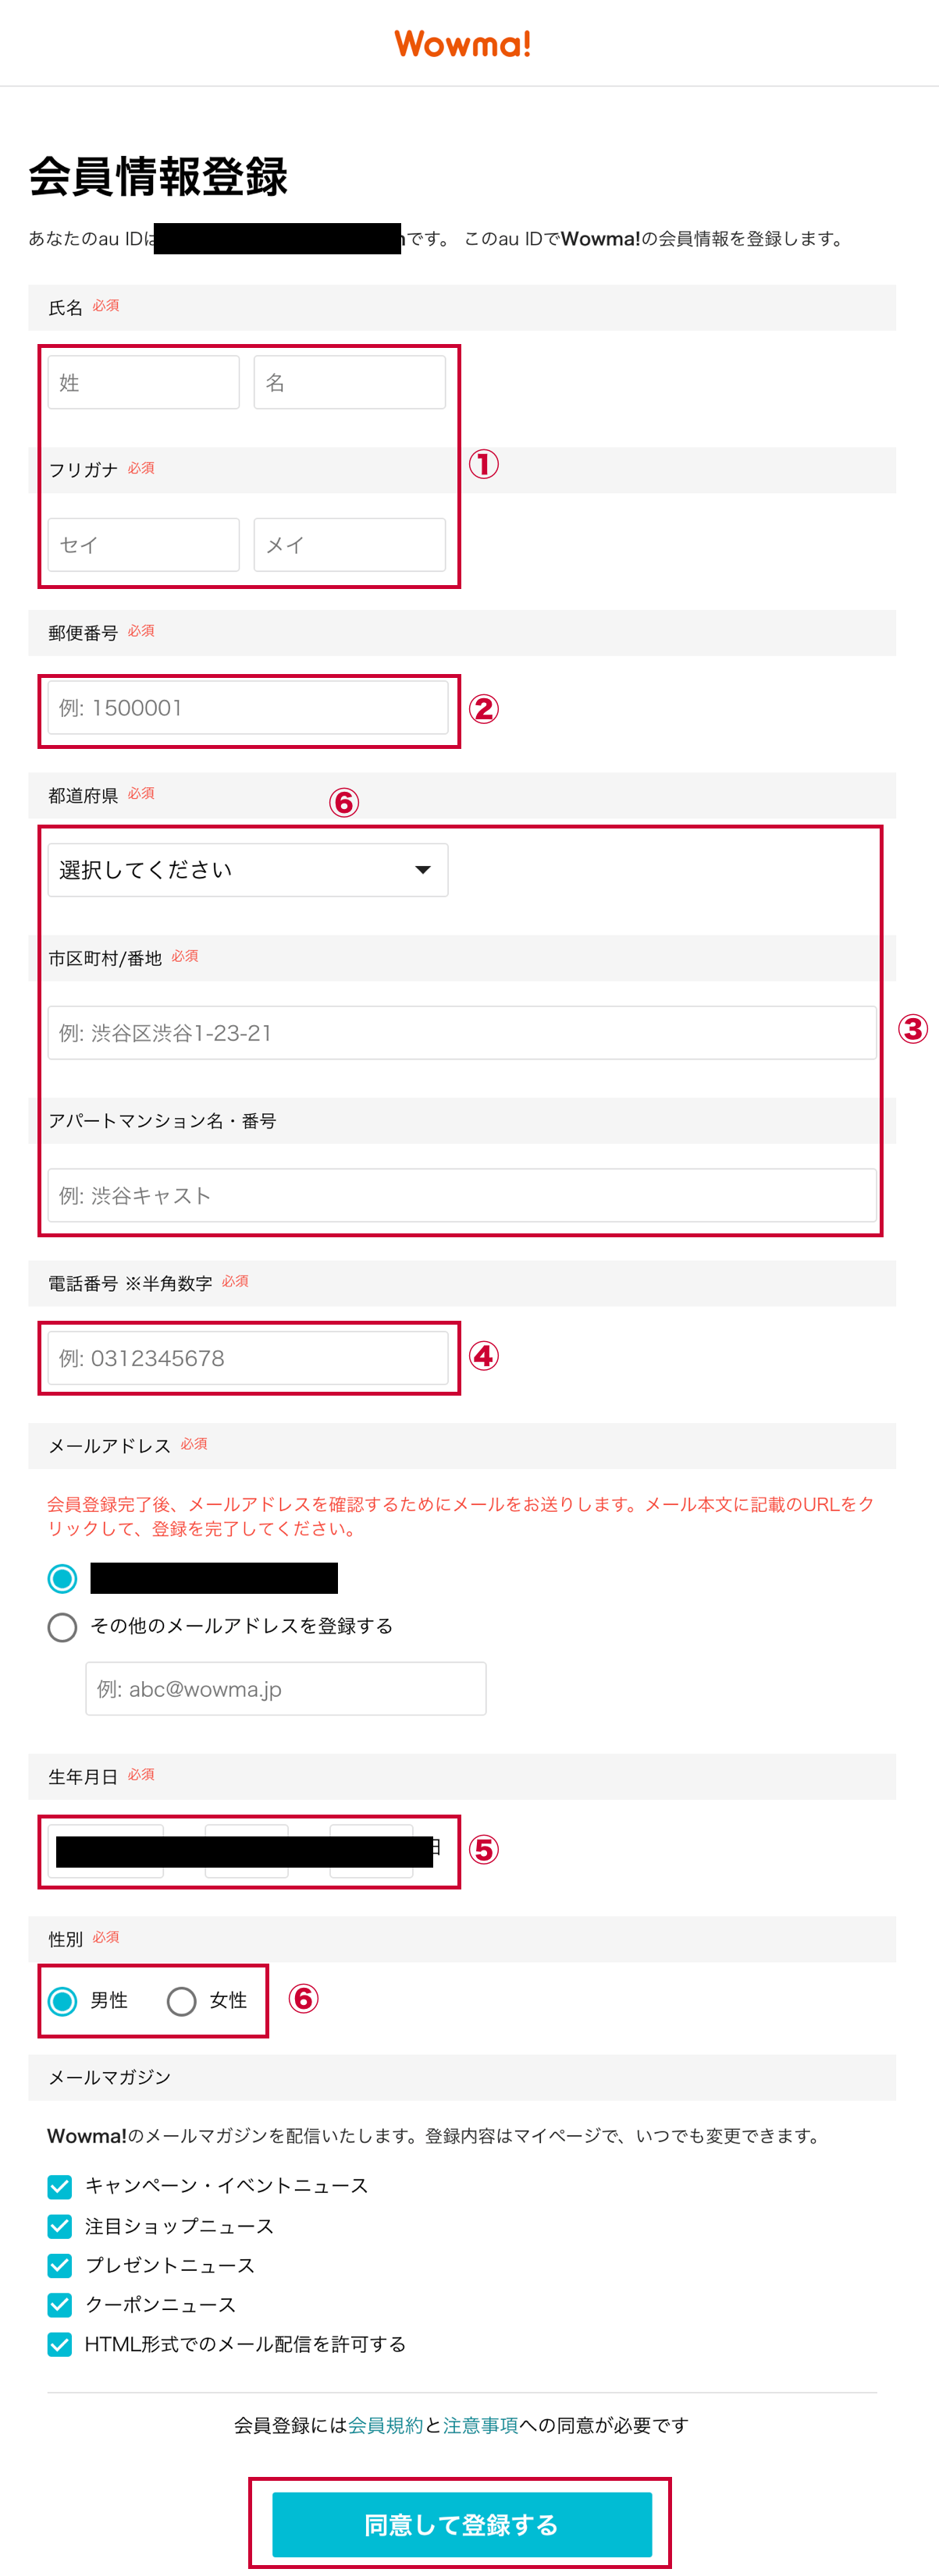 Au Pay ふるさと納税 旧wowma の会員登録方法や使い方まとめ ふるさと納税ガイド